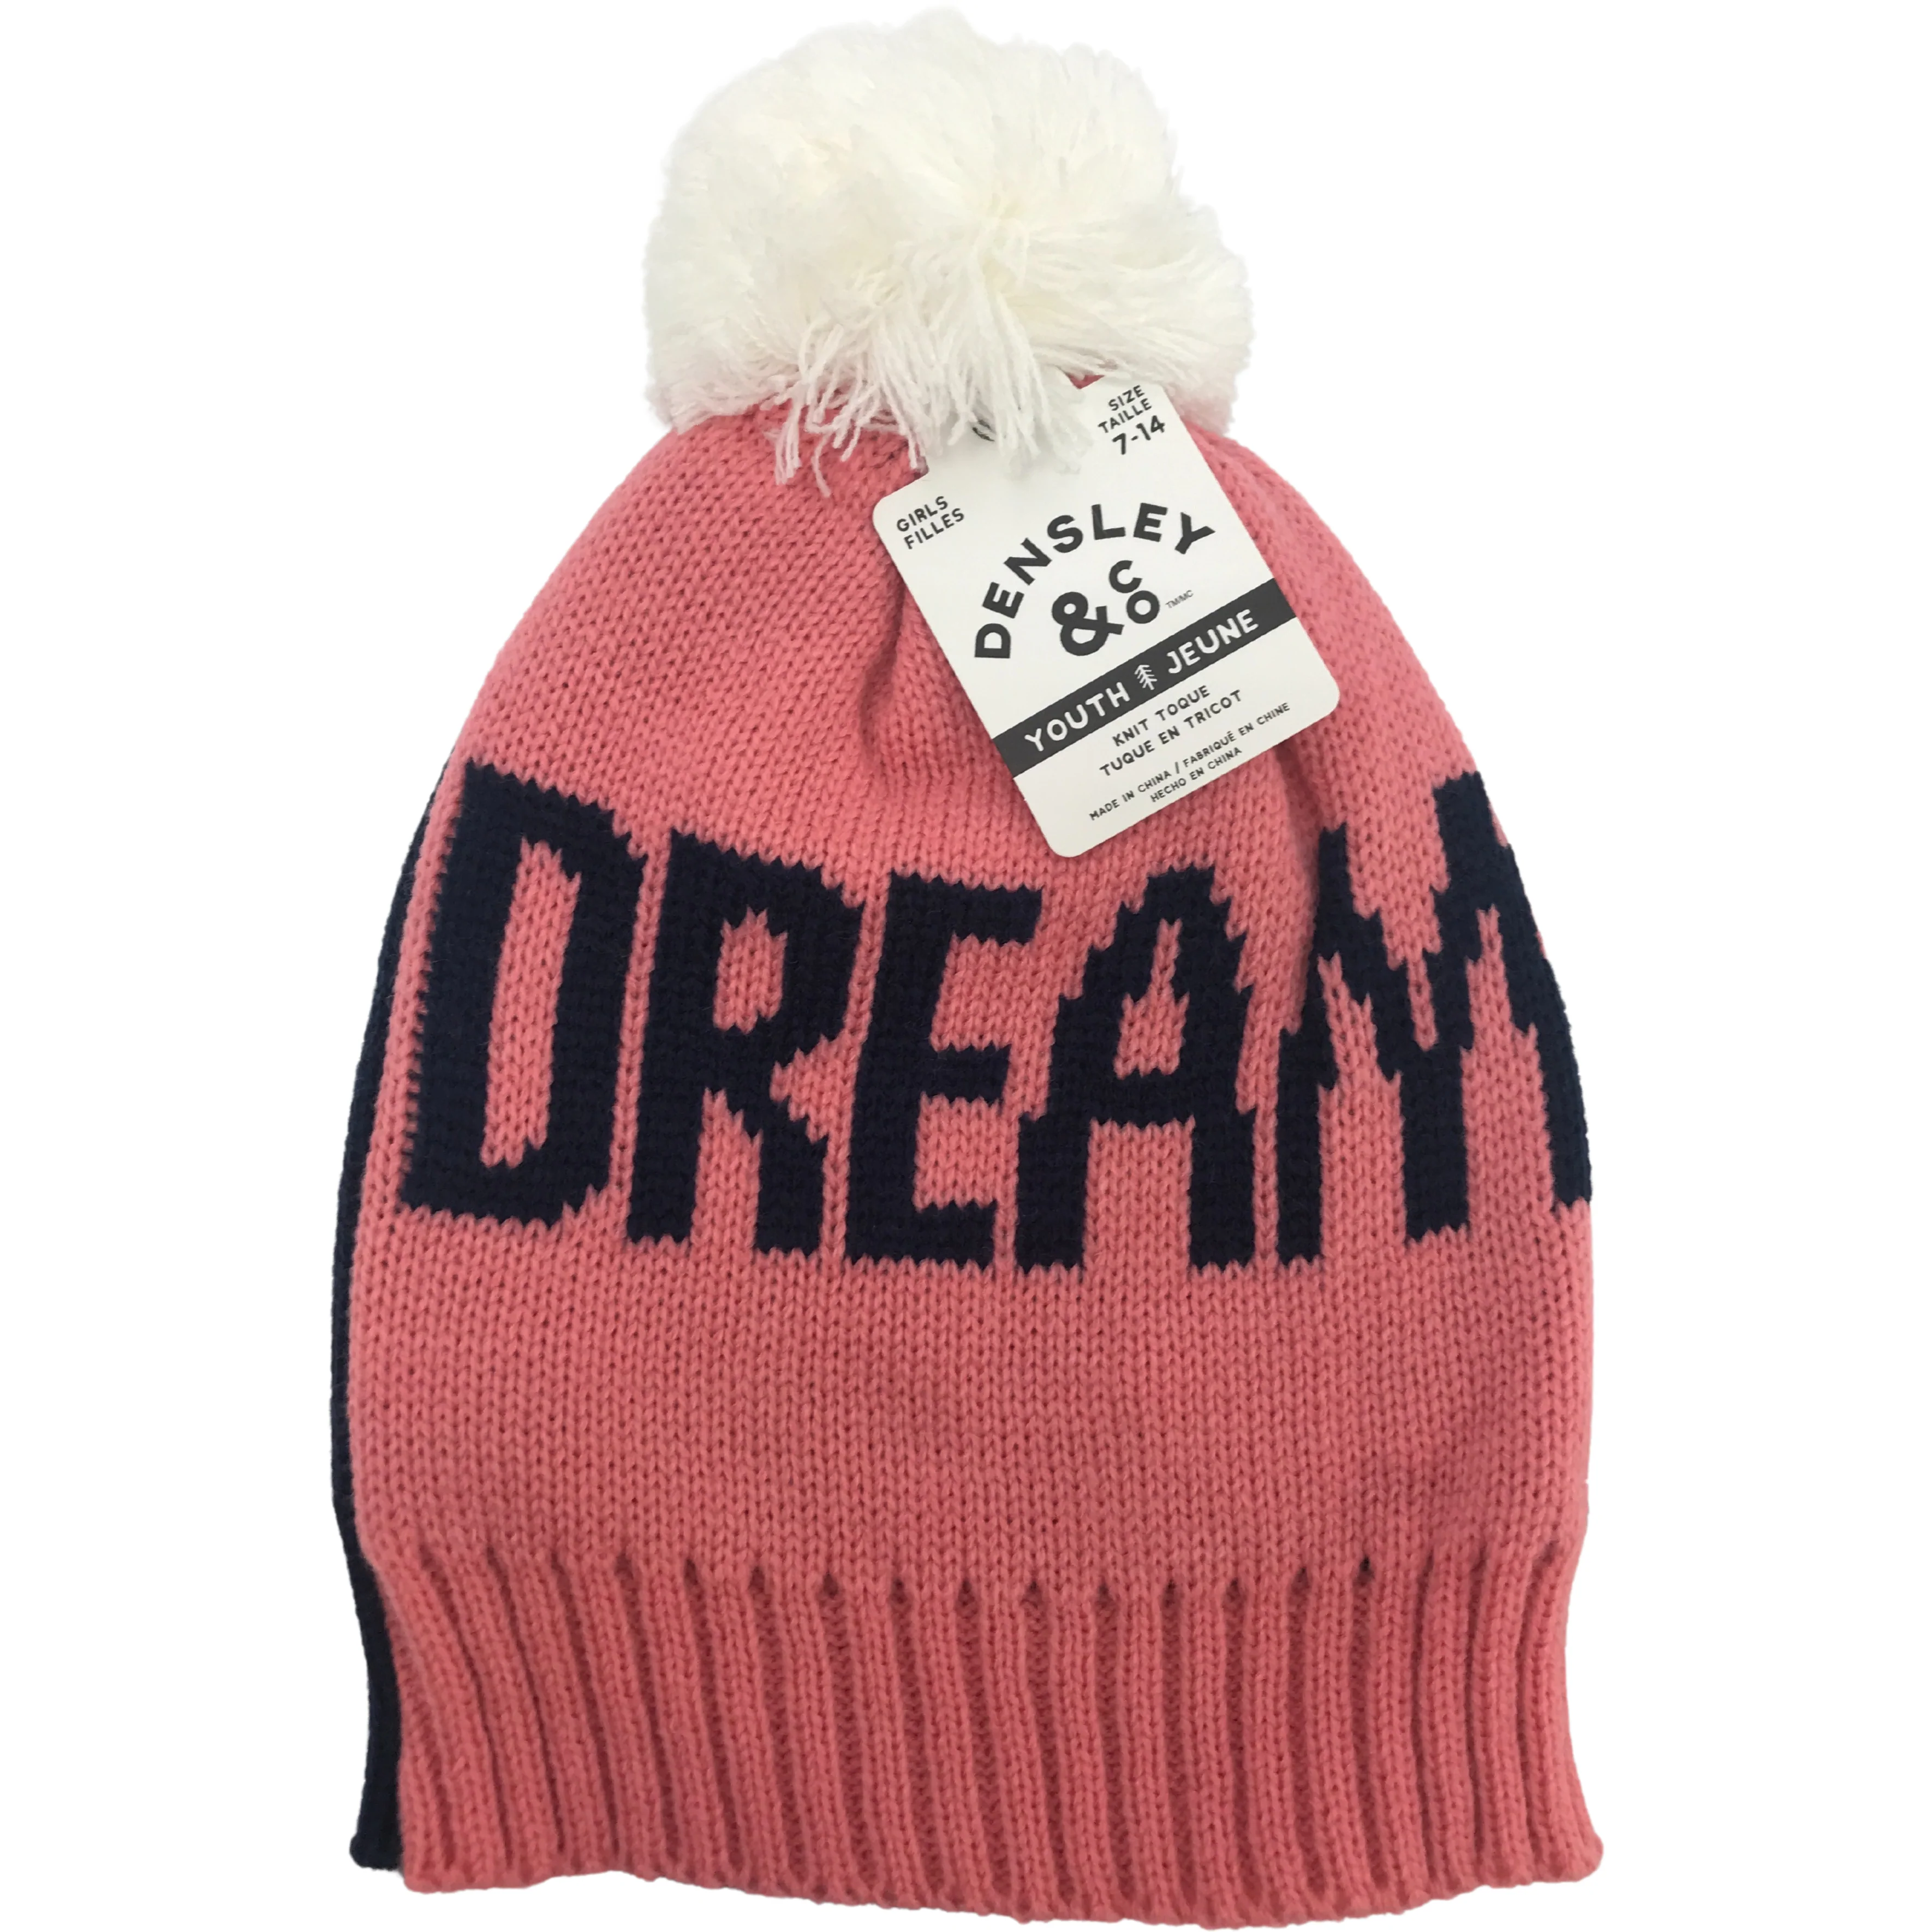 Densley & Co Girl's Youth Knit Hat / Winter Hat / Winter Toque / Pink, Blue & White